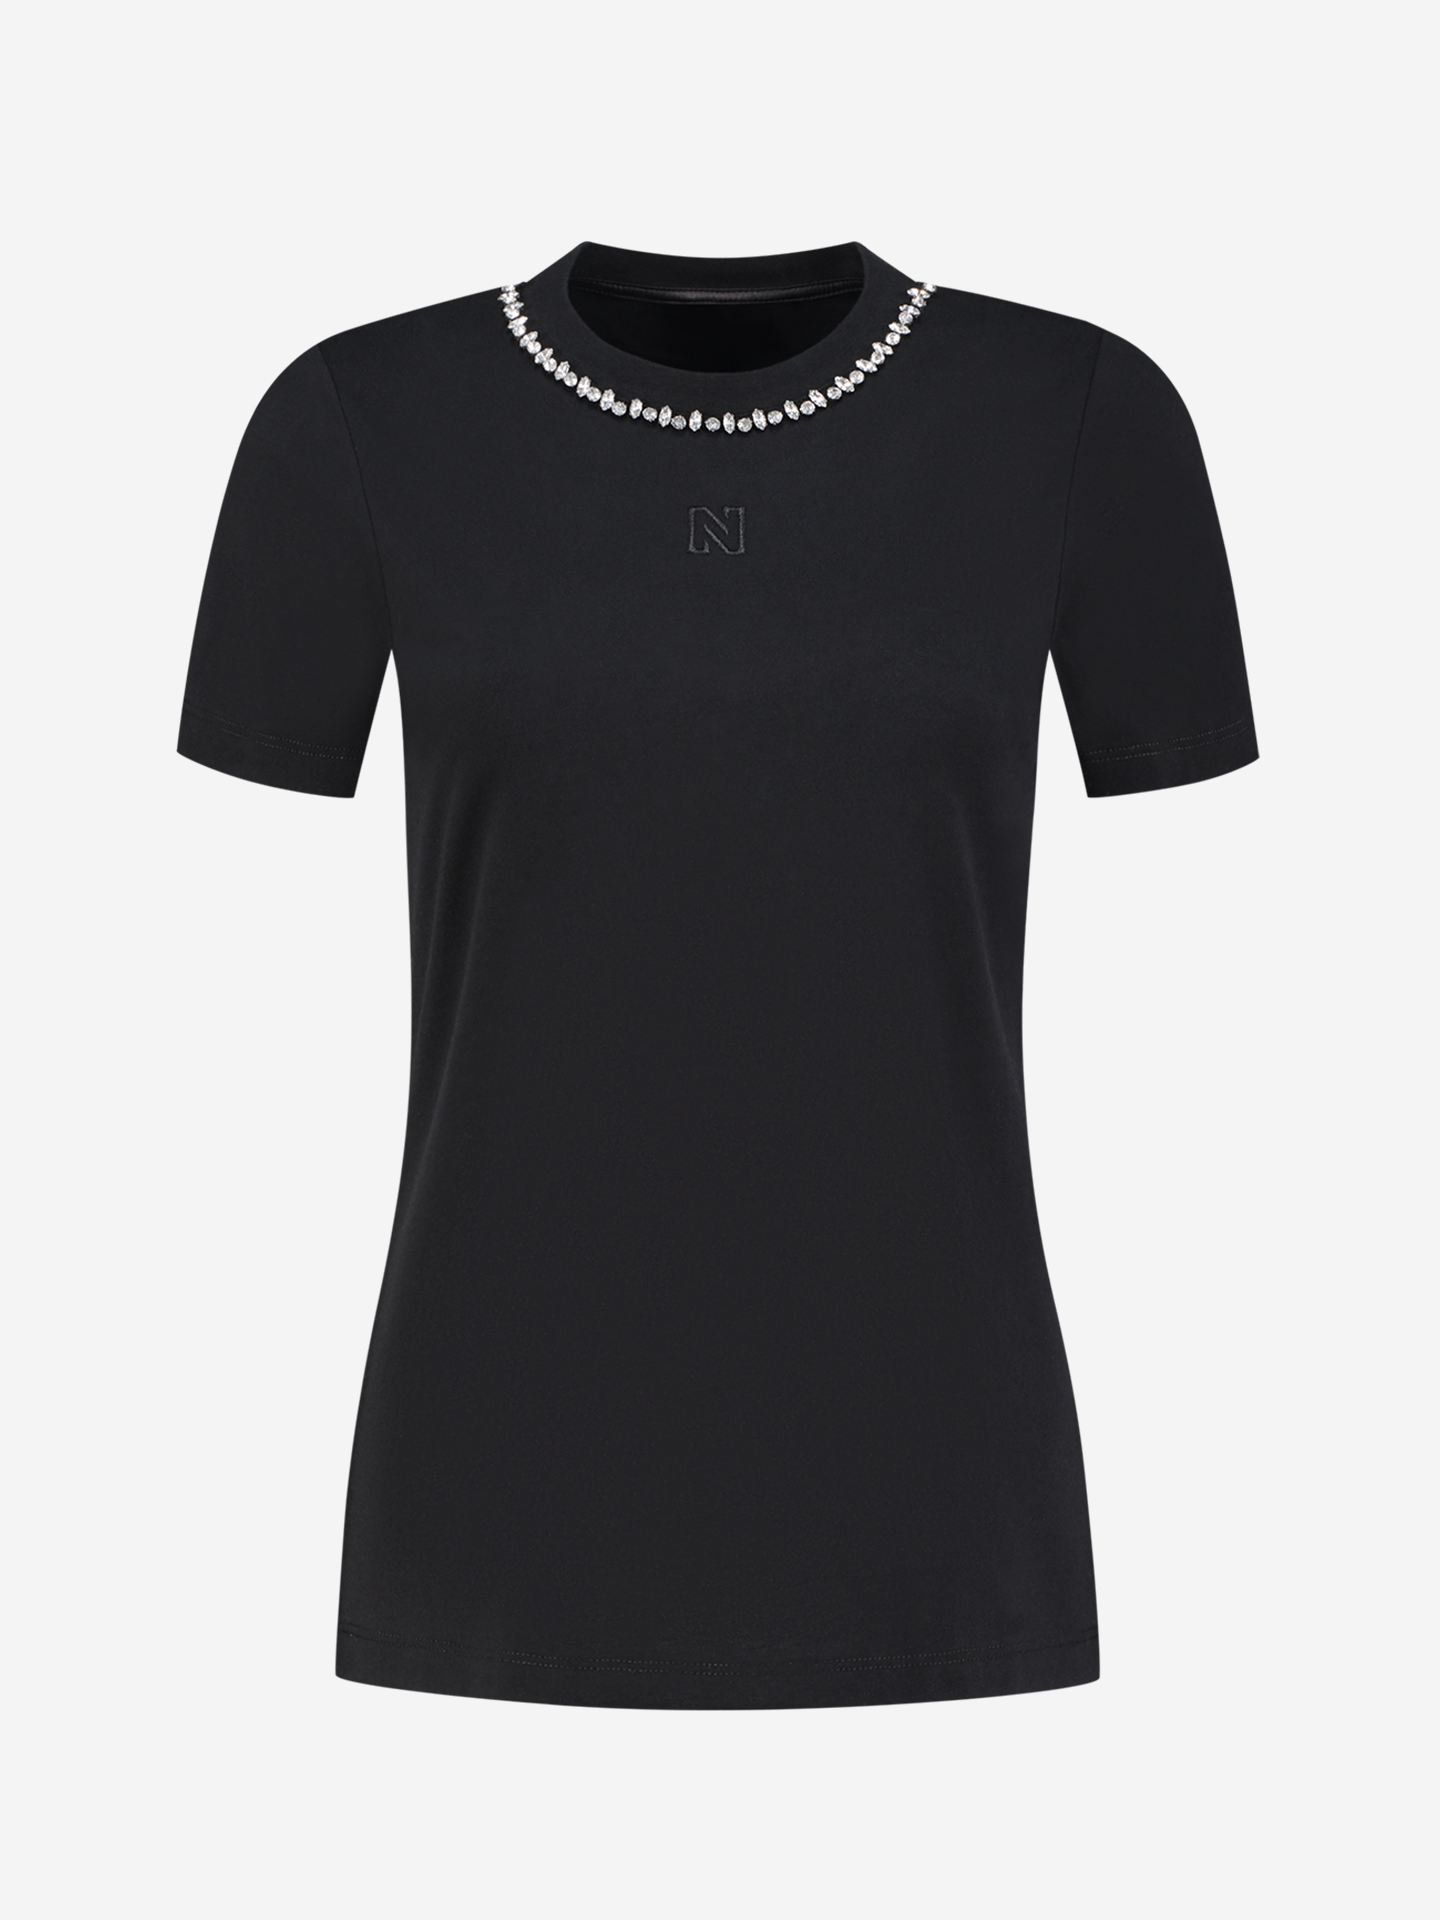 T-shirt with necklace detail